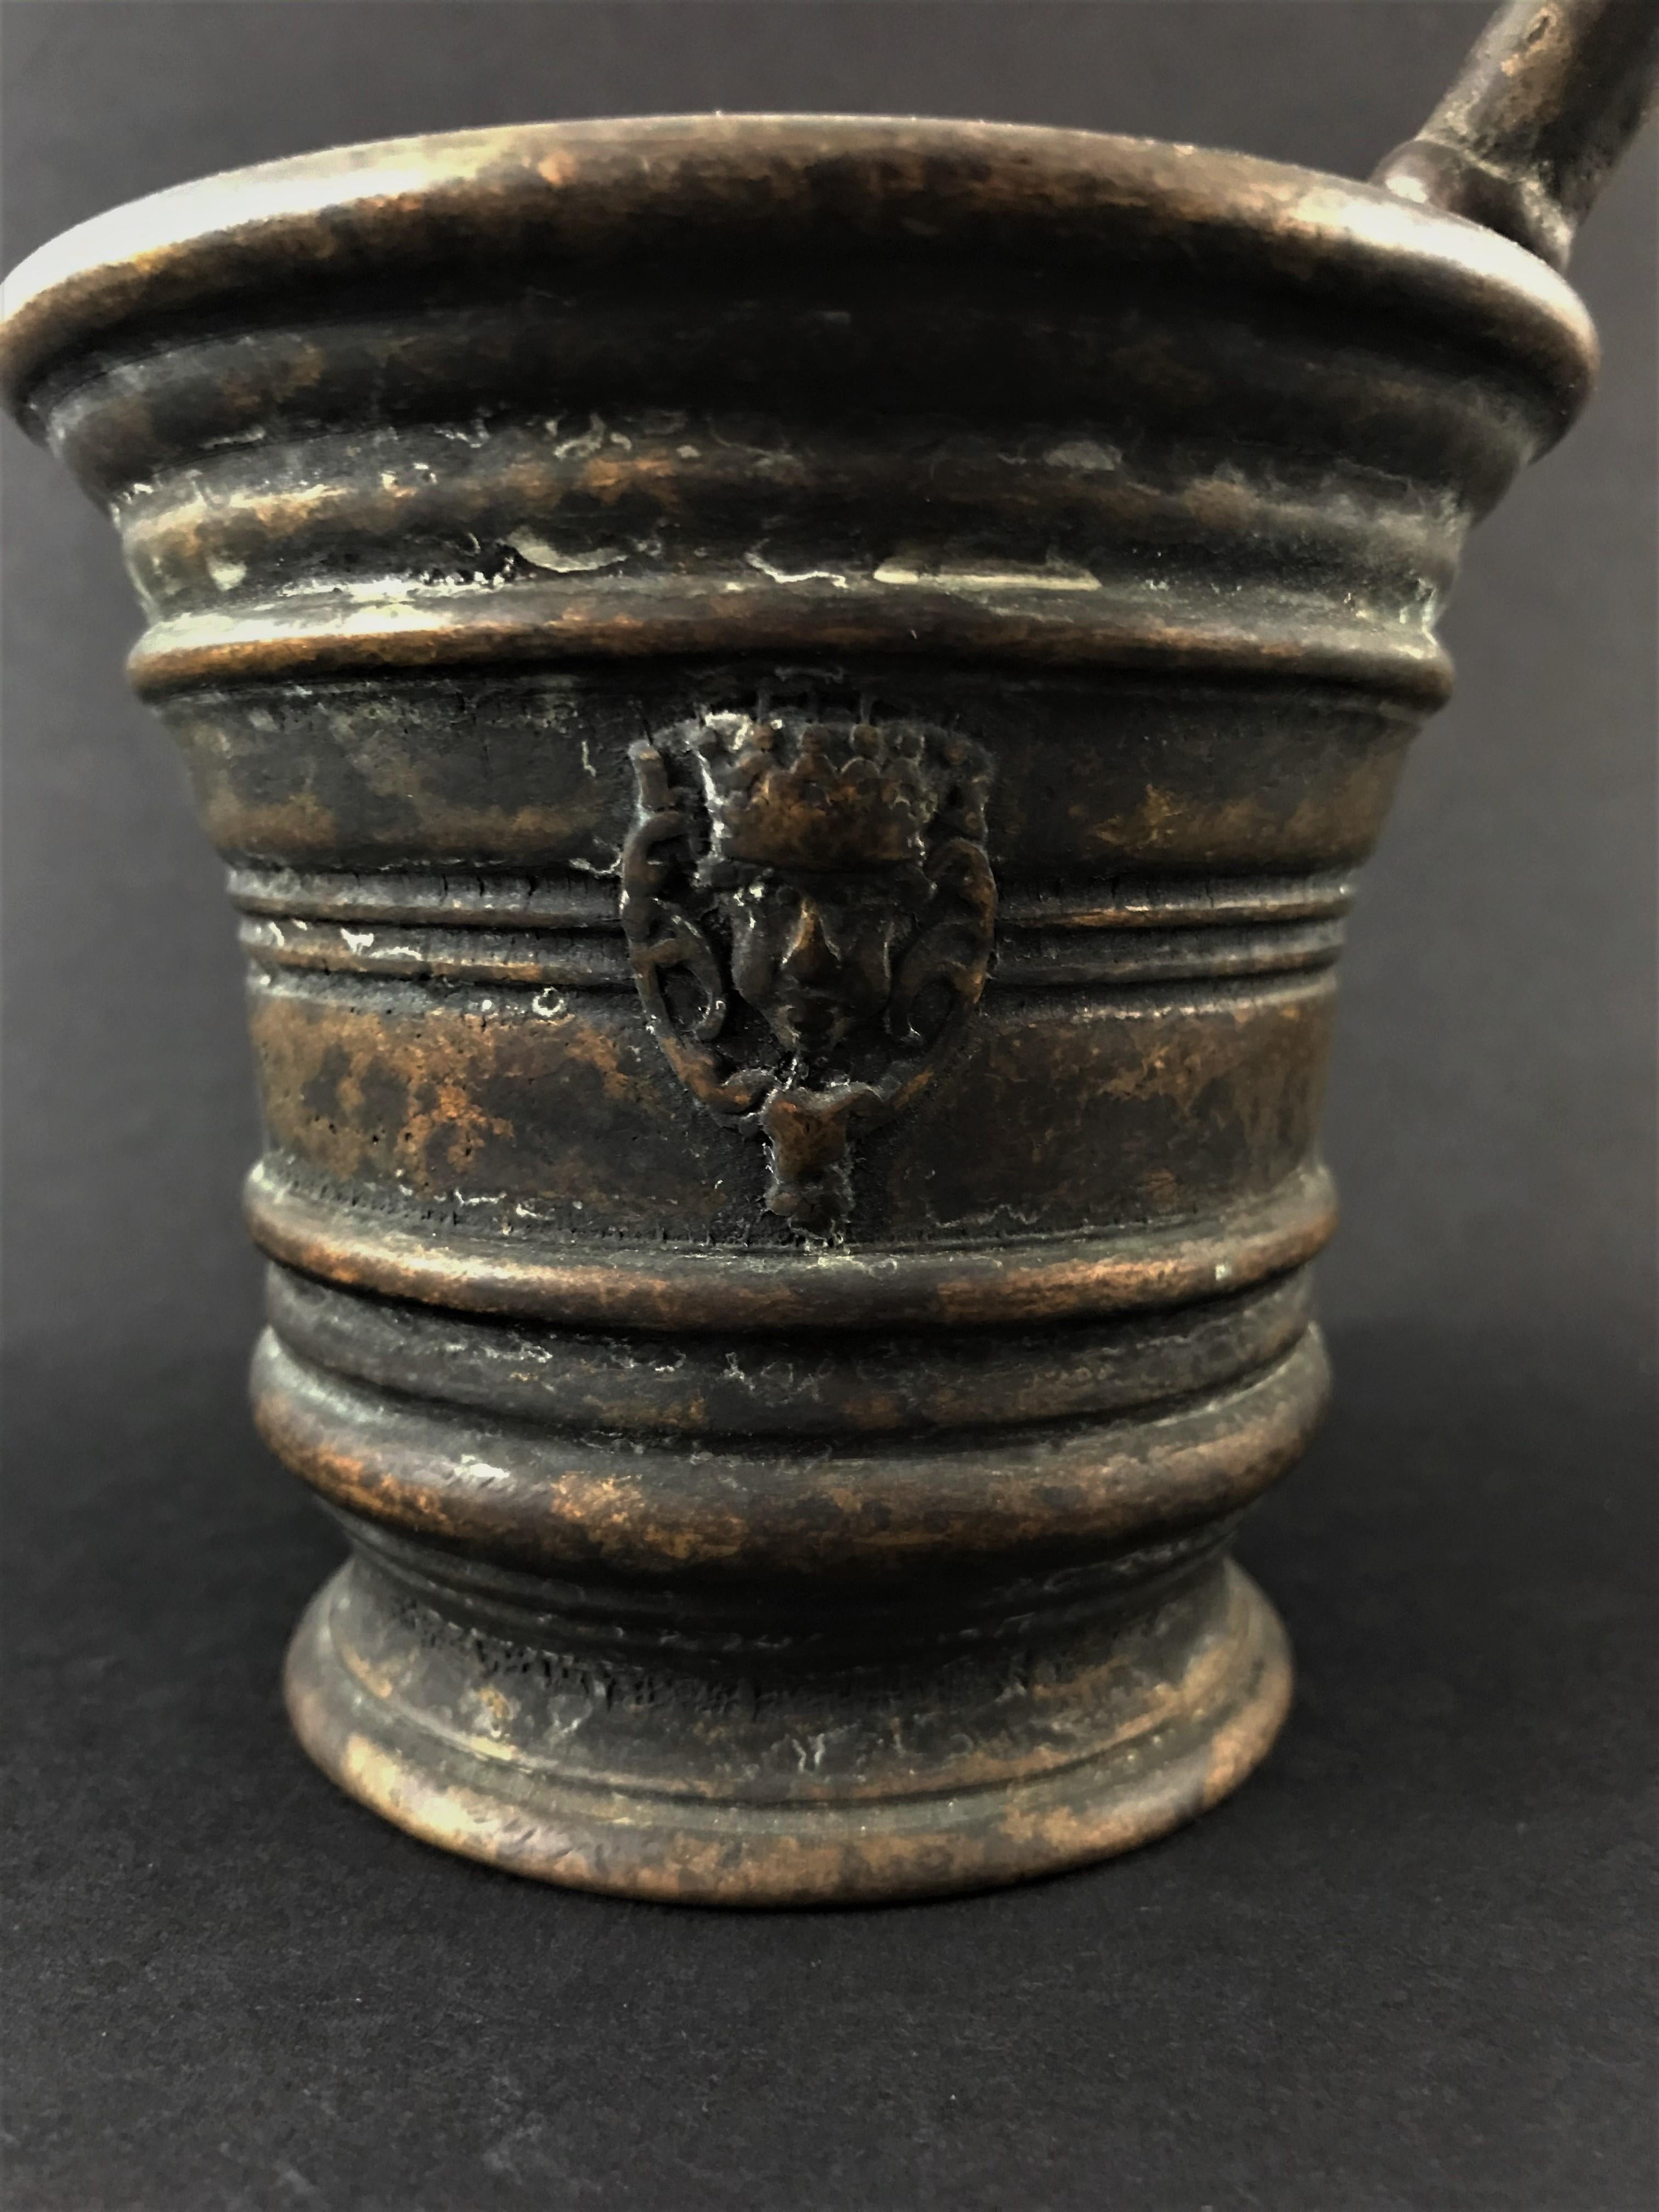 Mortar decorated with a mascarons and pestle, patinated bronze, early 20th century.
Measures: Height mortar 4 inches
Height pestle 7 inches.
 